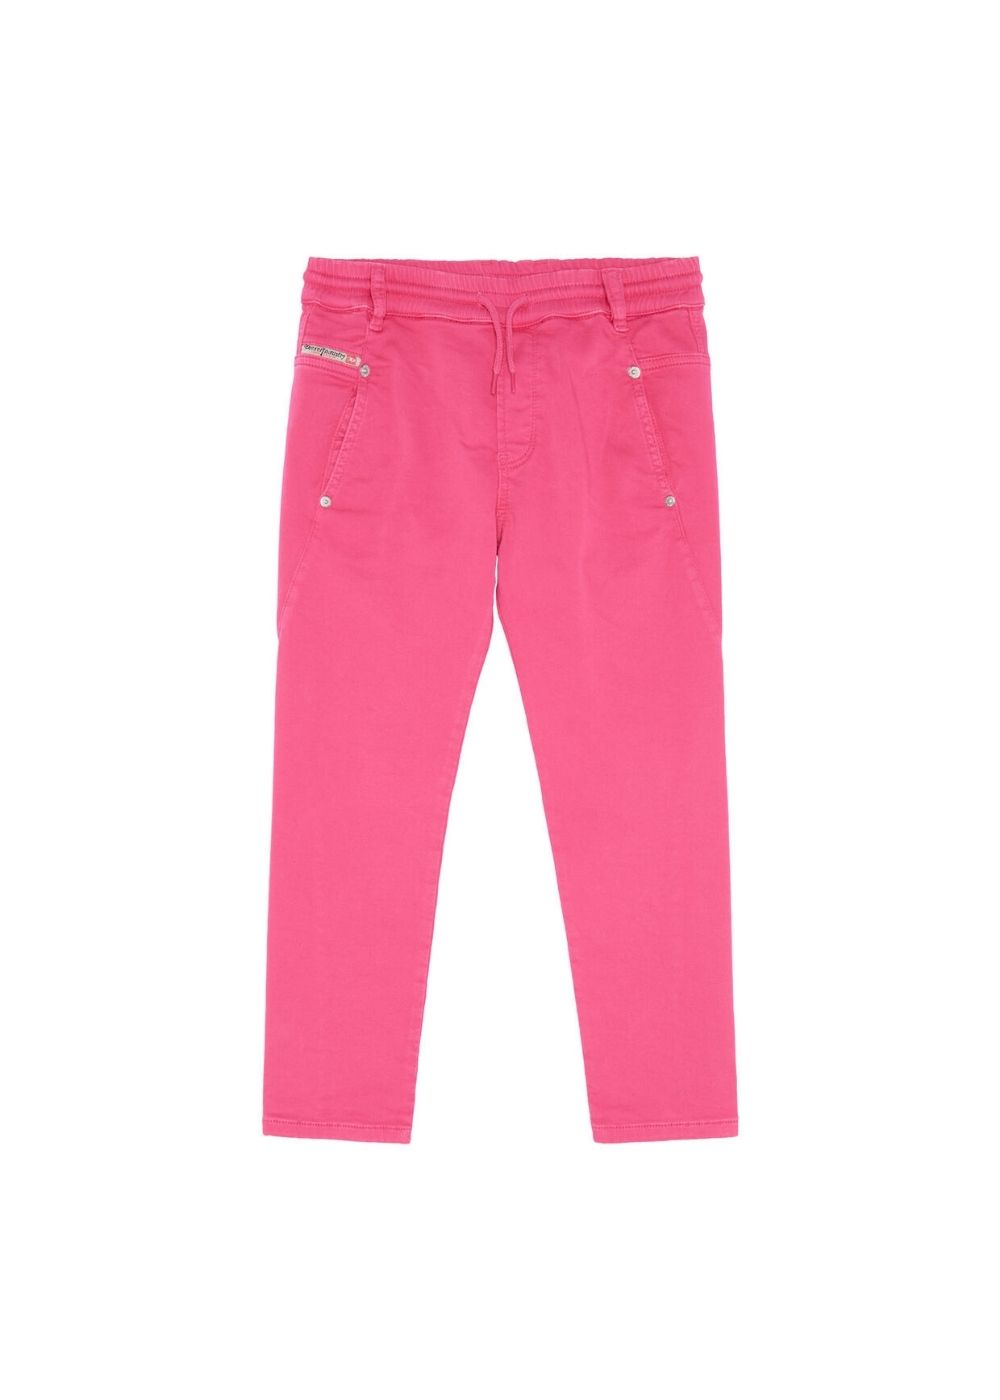 Featured image for “Diesel Joggjeans fucsia”